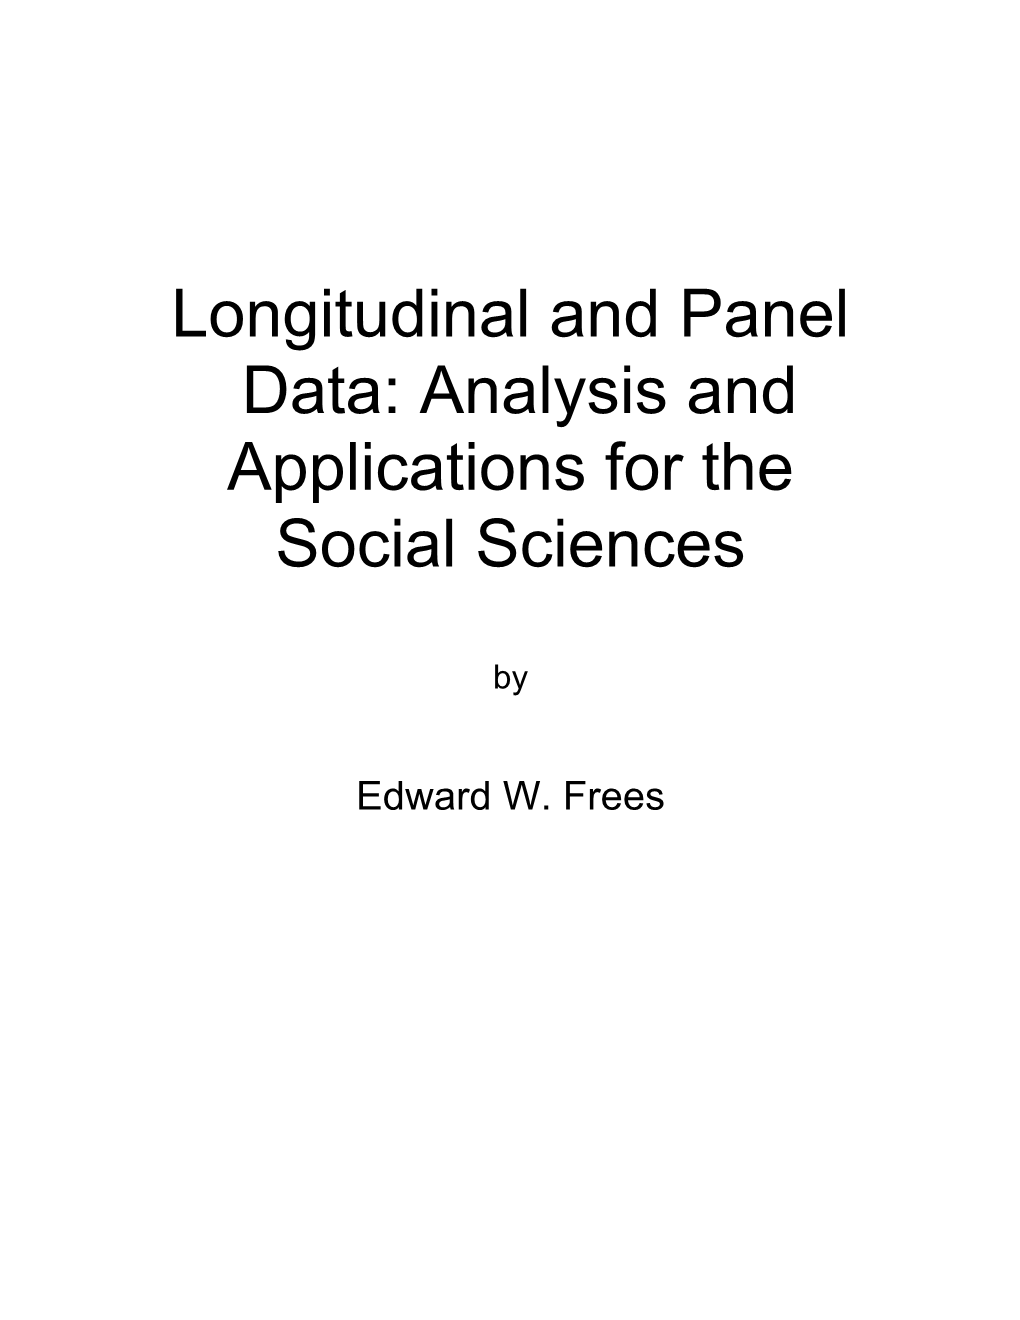 Longitudinal and Panel Data: Analysis and Applications for the Social Sciences